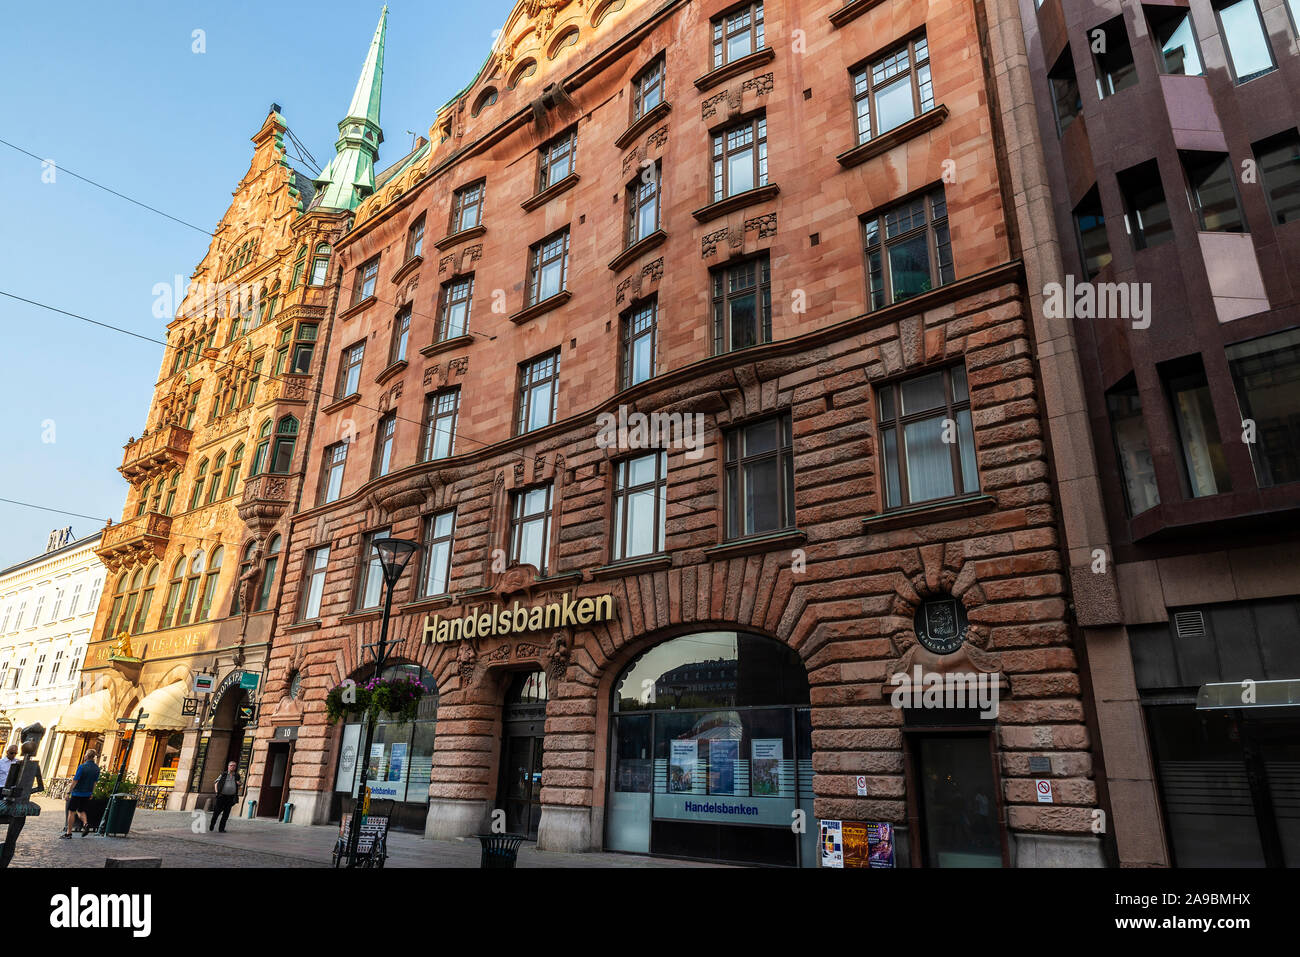 Malmo, Sweden - August 28, 2019: Facade of a bank branch of Handelsbanken on the street with people around in Sweden Stock Photo